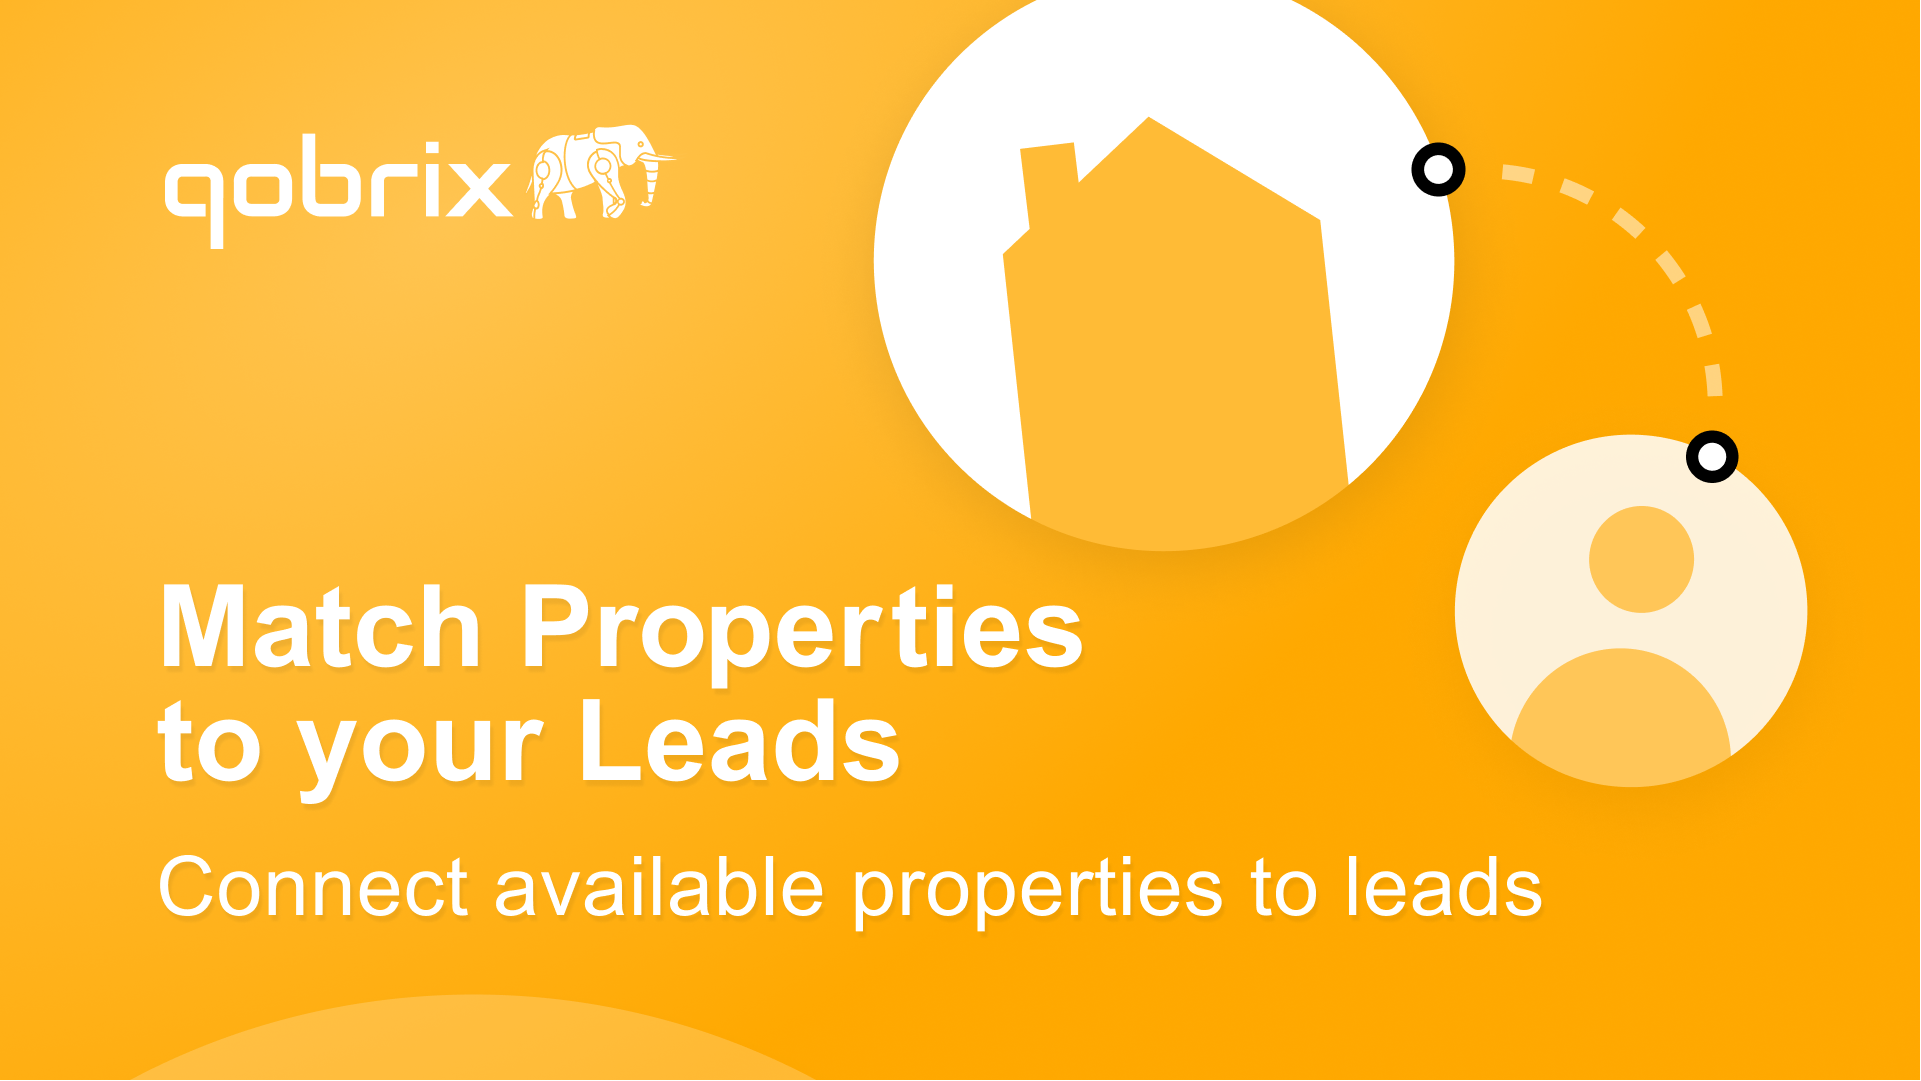 Matching Properties to Leads